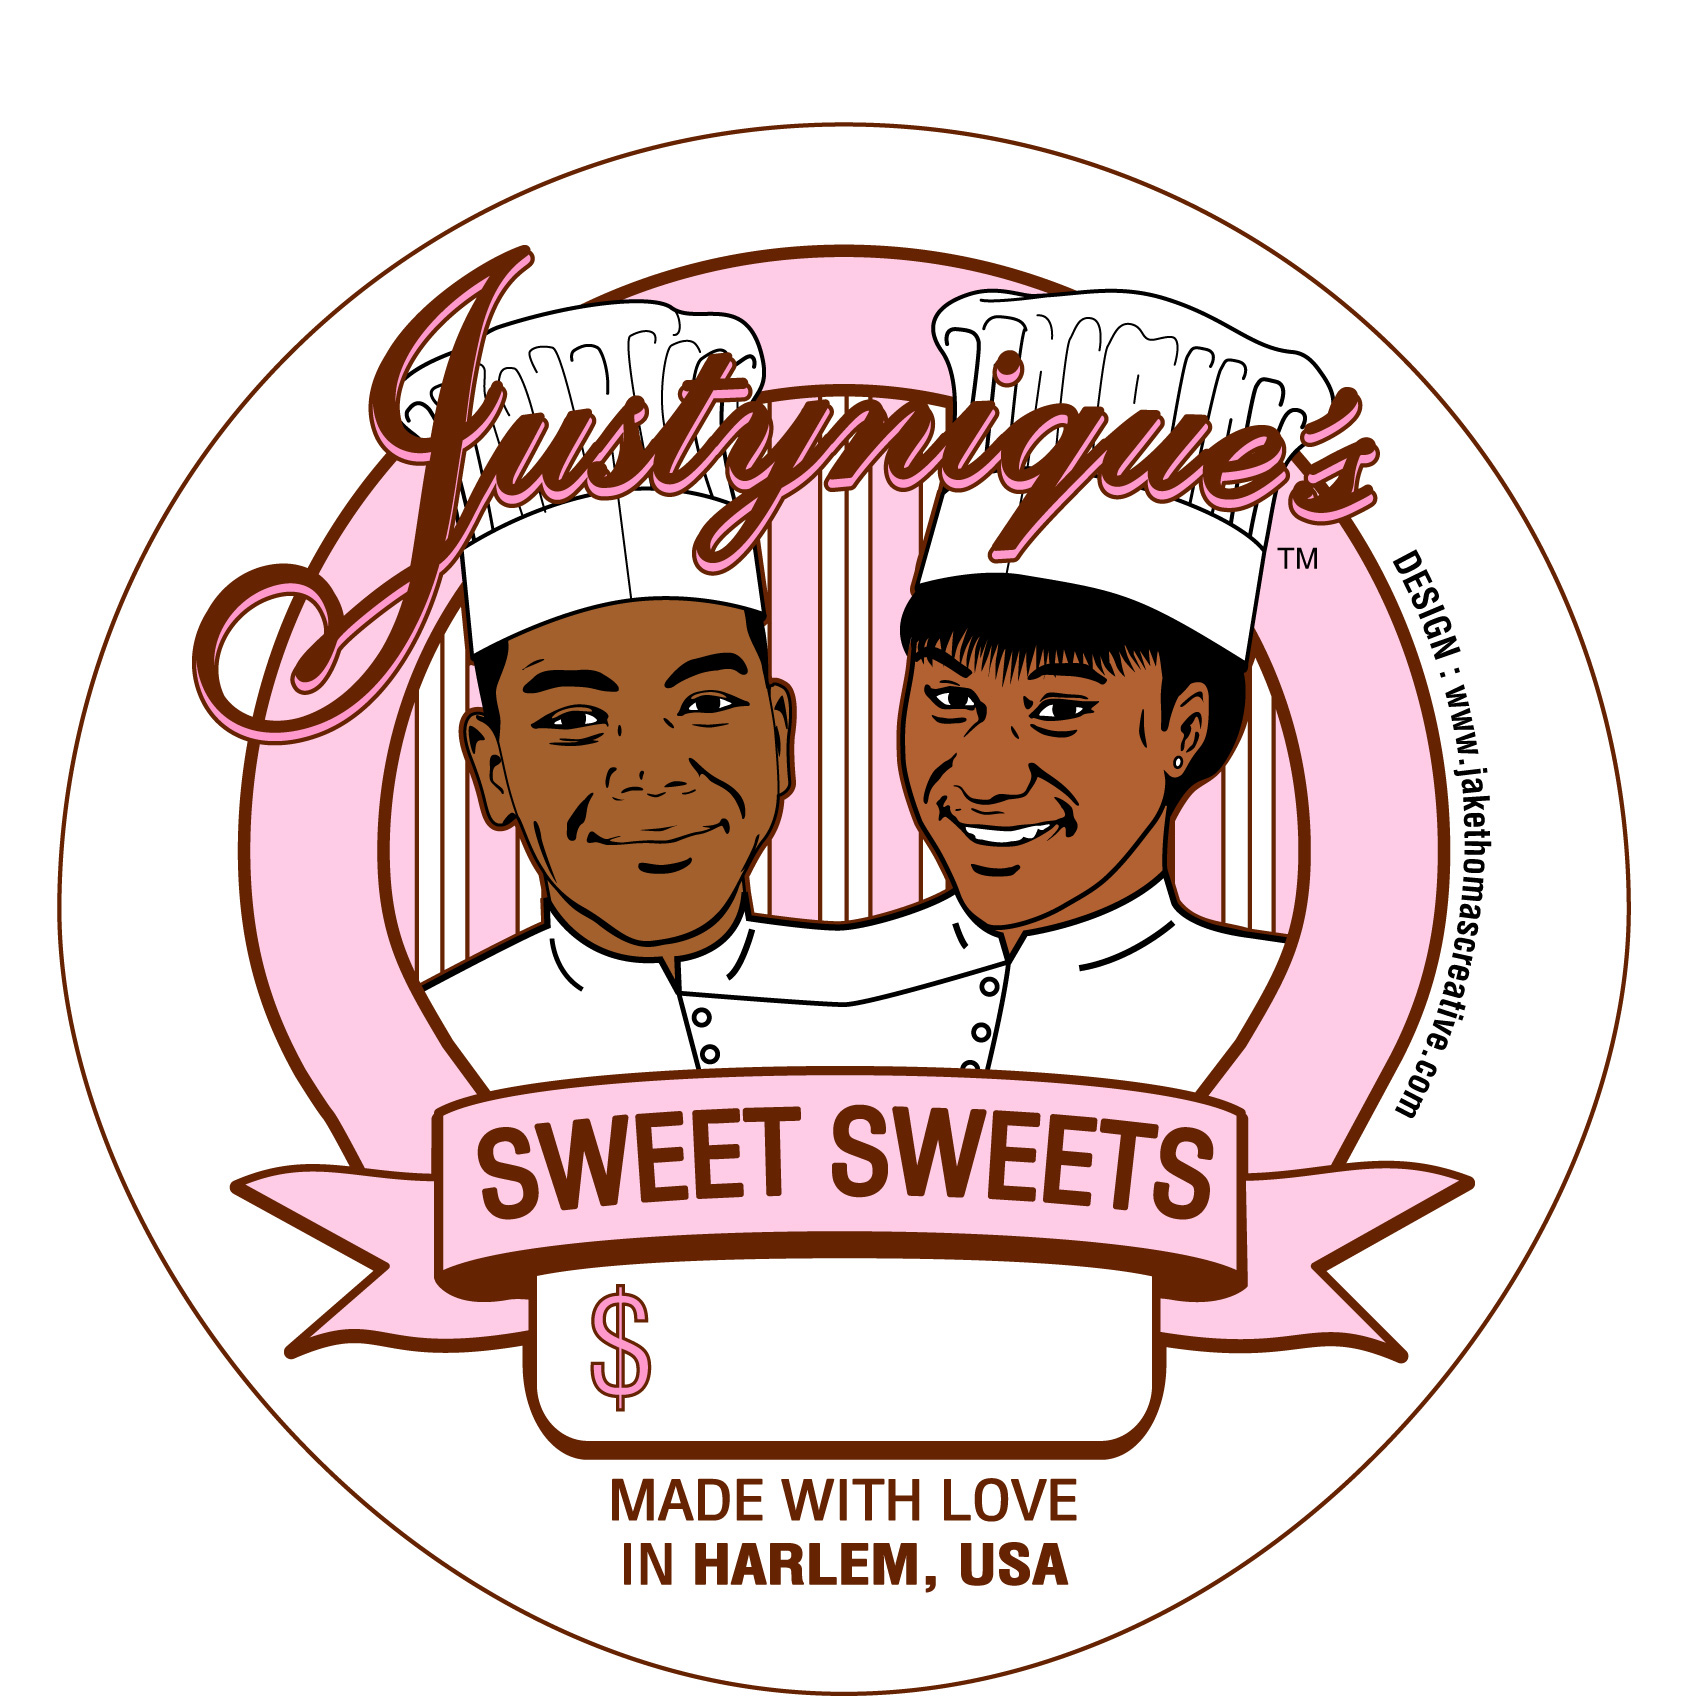 'Justynique's Sweet Sweets' logo